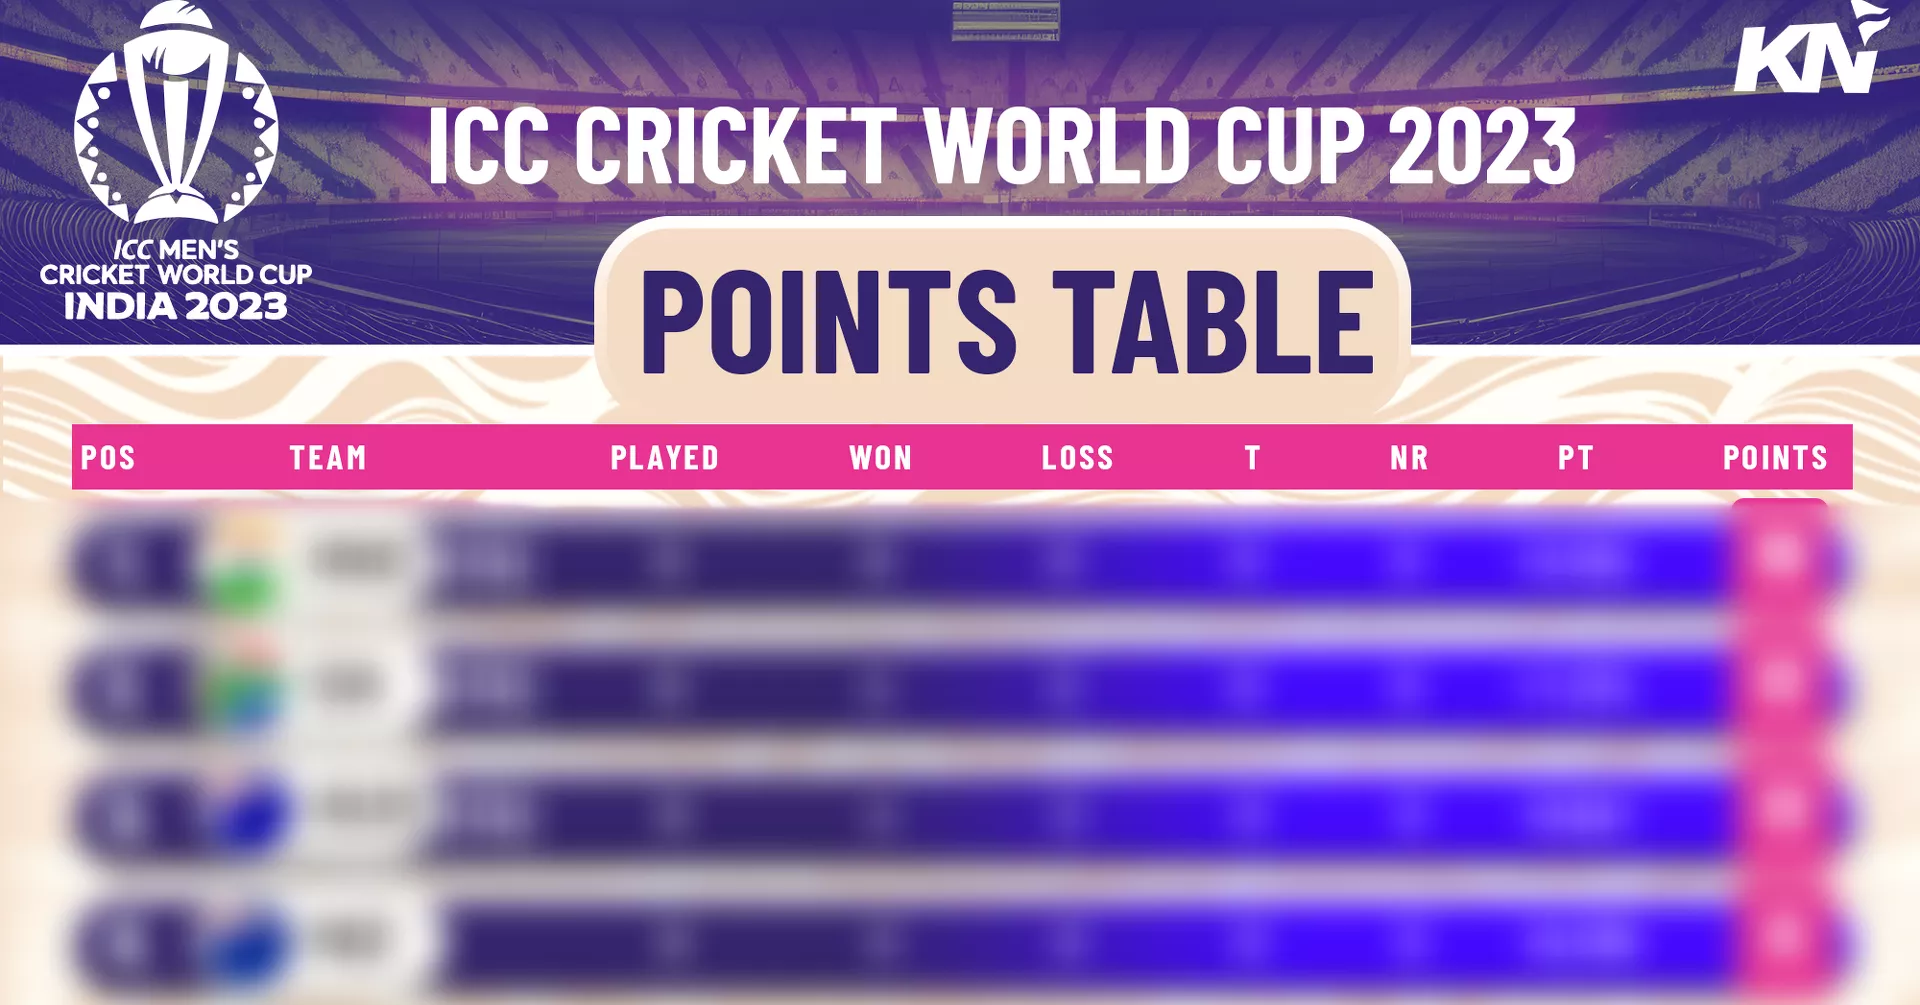 ICC Cricket World Cup 2023: Points Table, Most Runs, Most Wickets, after Match 39, AUS vs AFG